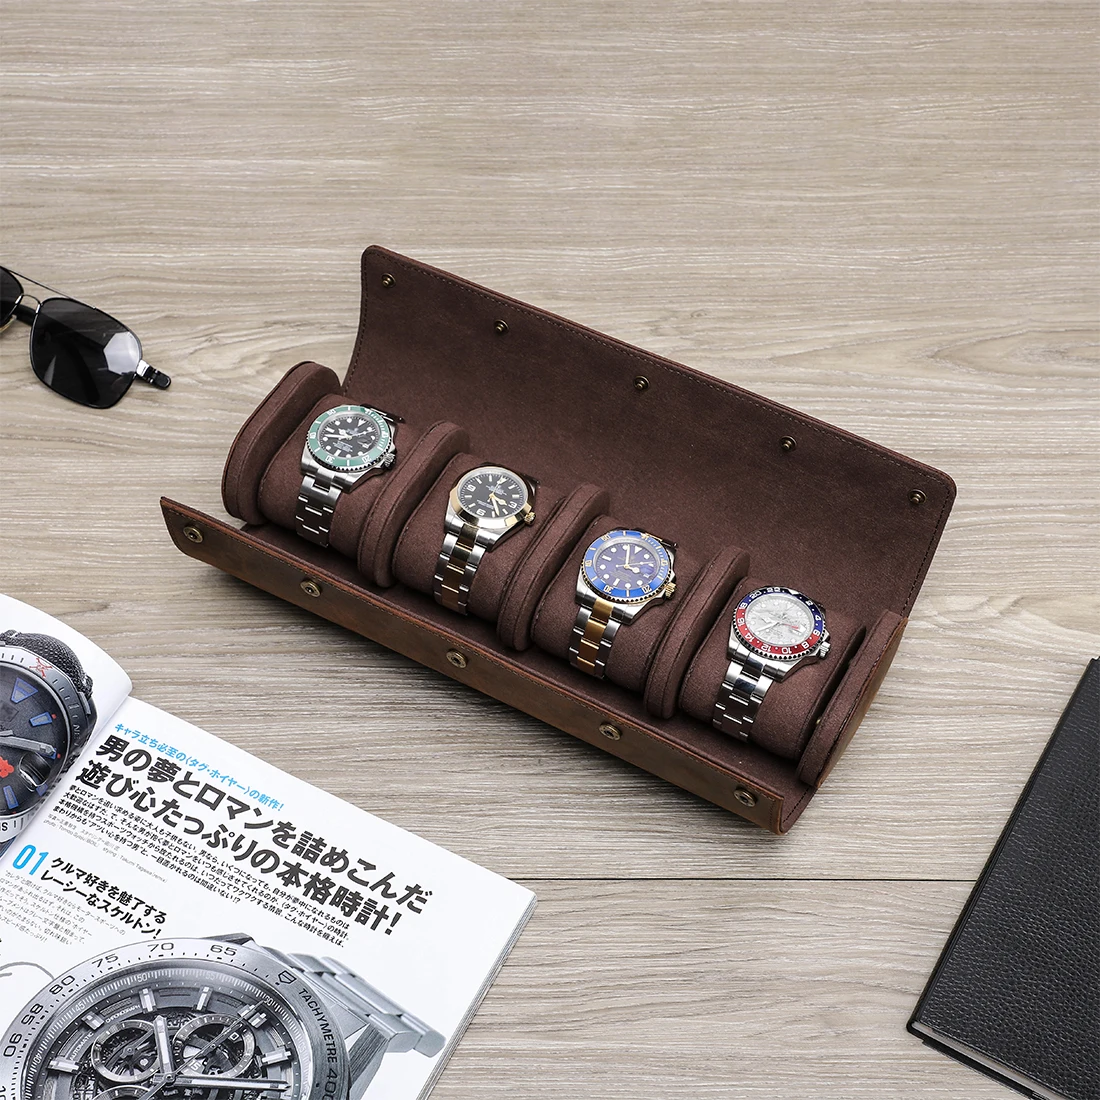 luxury-4-slots-watch-roll-travel-case-chic-vintage-genuine-leather-display-watch-storage-box-with-slid-in-out-watch-organizers